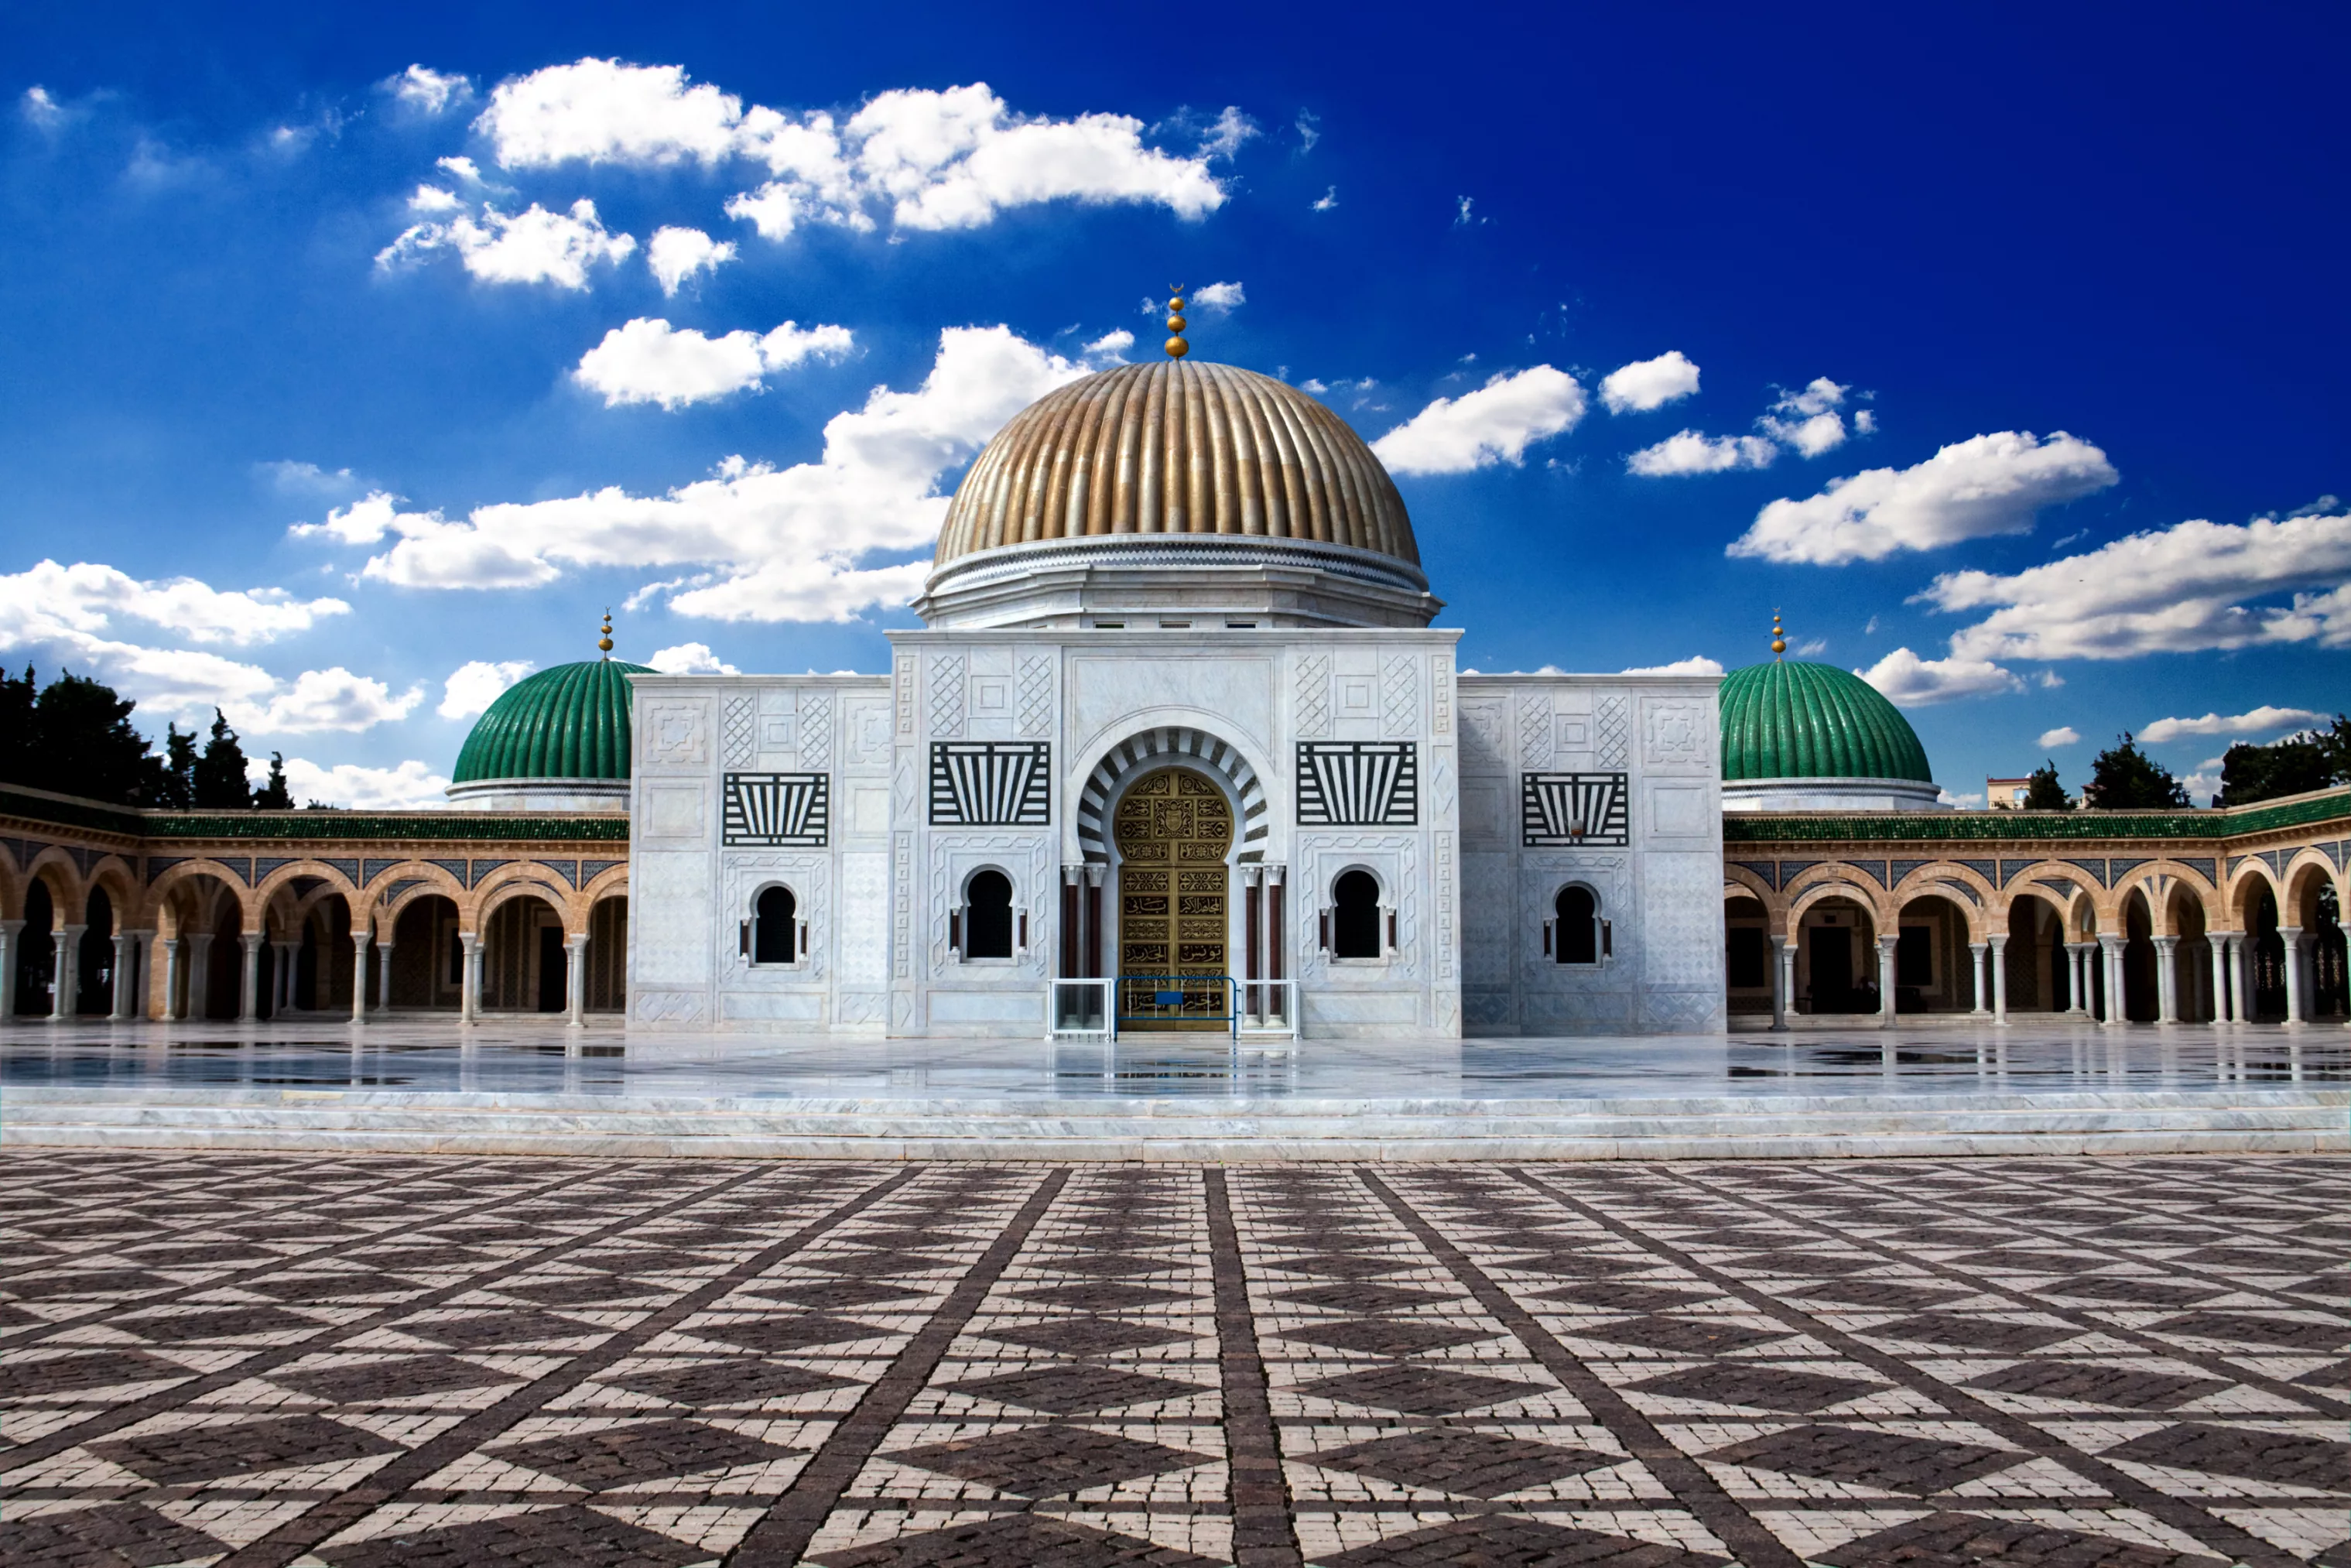 Mausoleum of Habib Bourguiba in Tunisia, Africa | Museums,Architecture - Rated 3.6